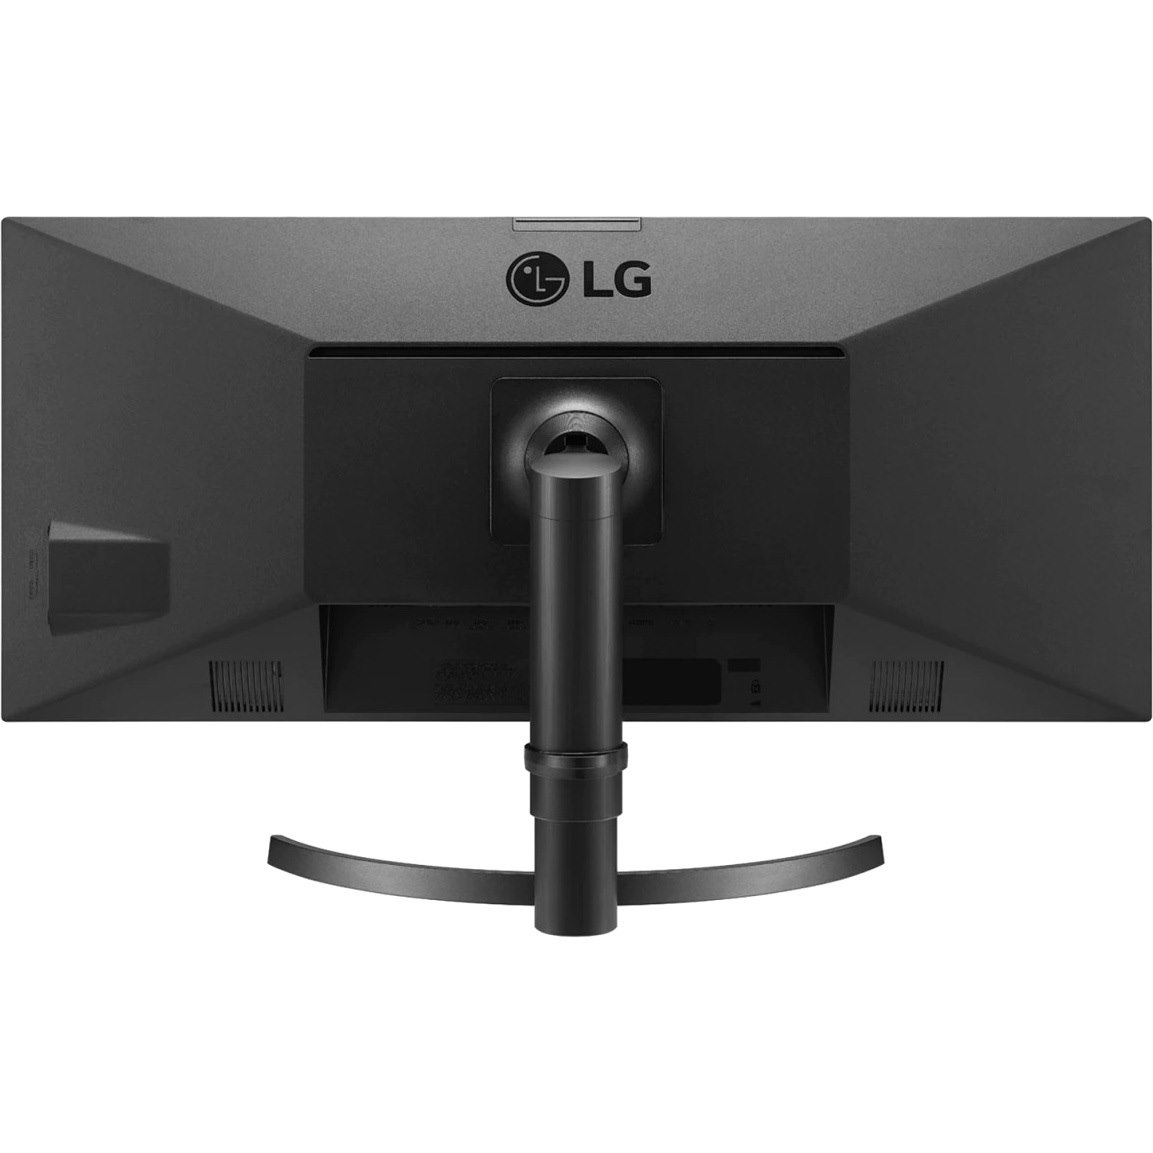 LG 34CN650I-6N All-in-One Thin Client - Intel Celeron J4105 Quad-core (4 Core) 1.50 GHz